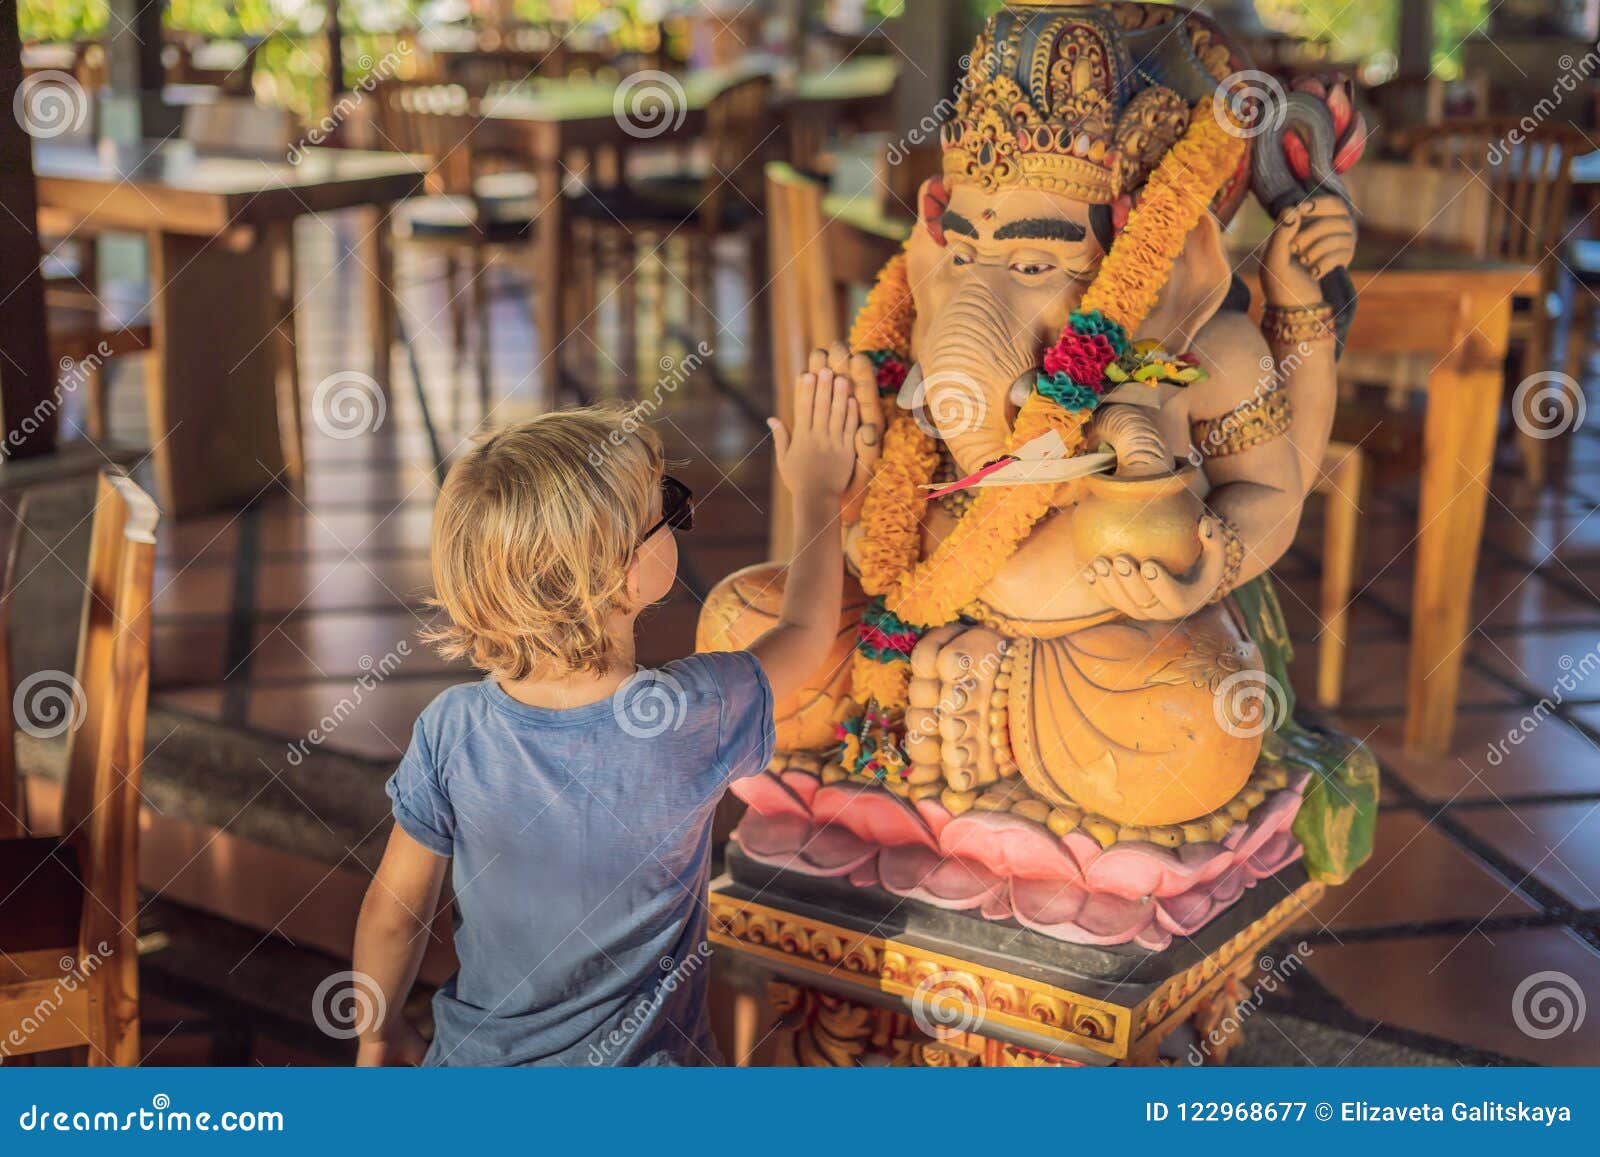 caucasian boy high-five ganesha. meeting western and eastern culture concept. oriental and occidental. traveling to asia with chi